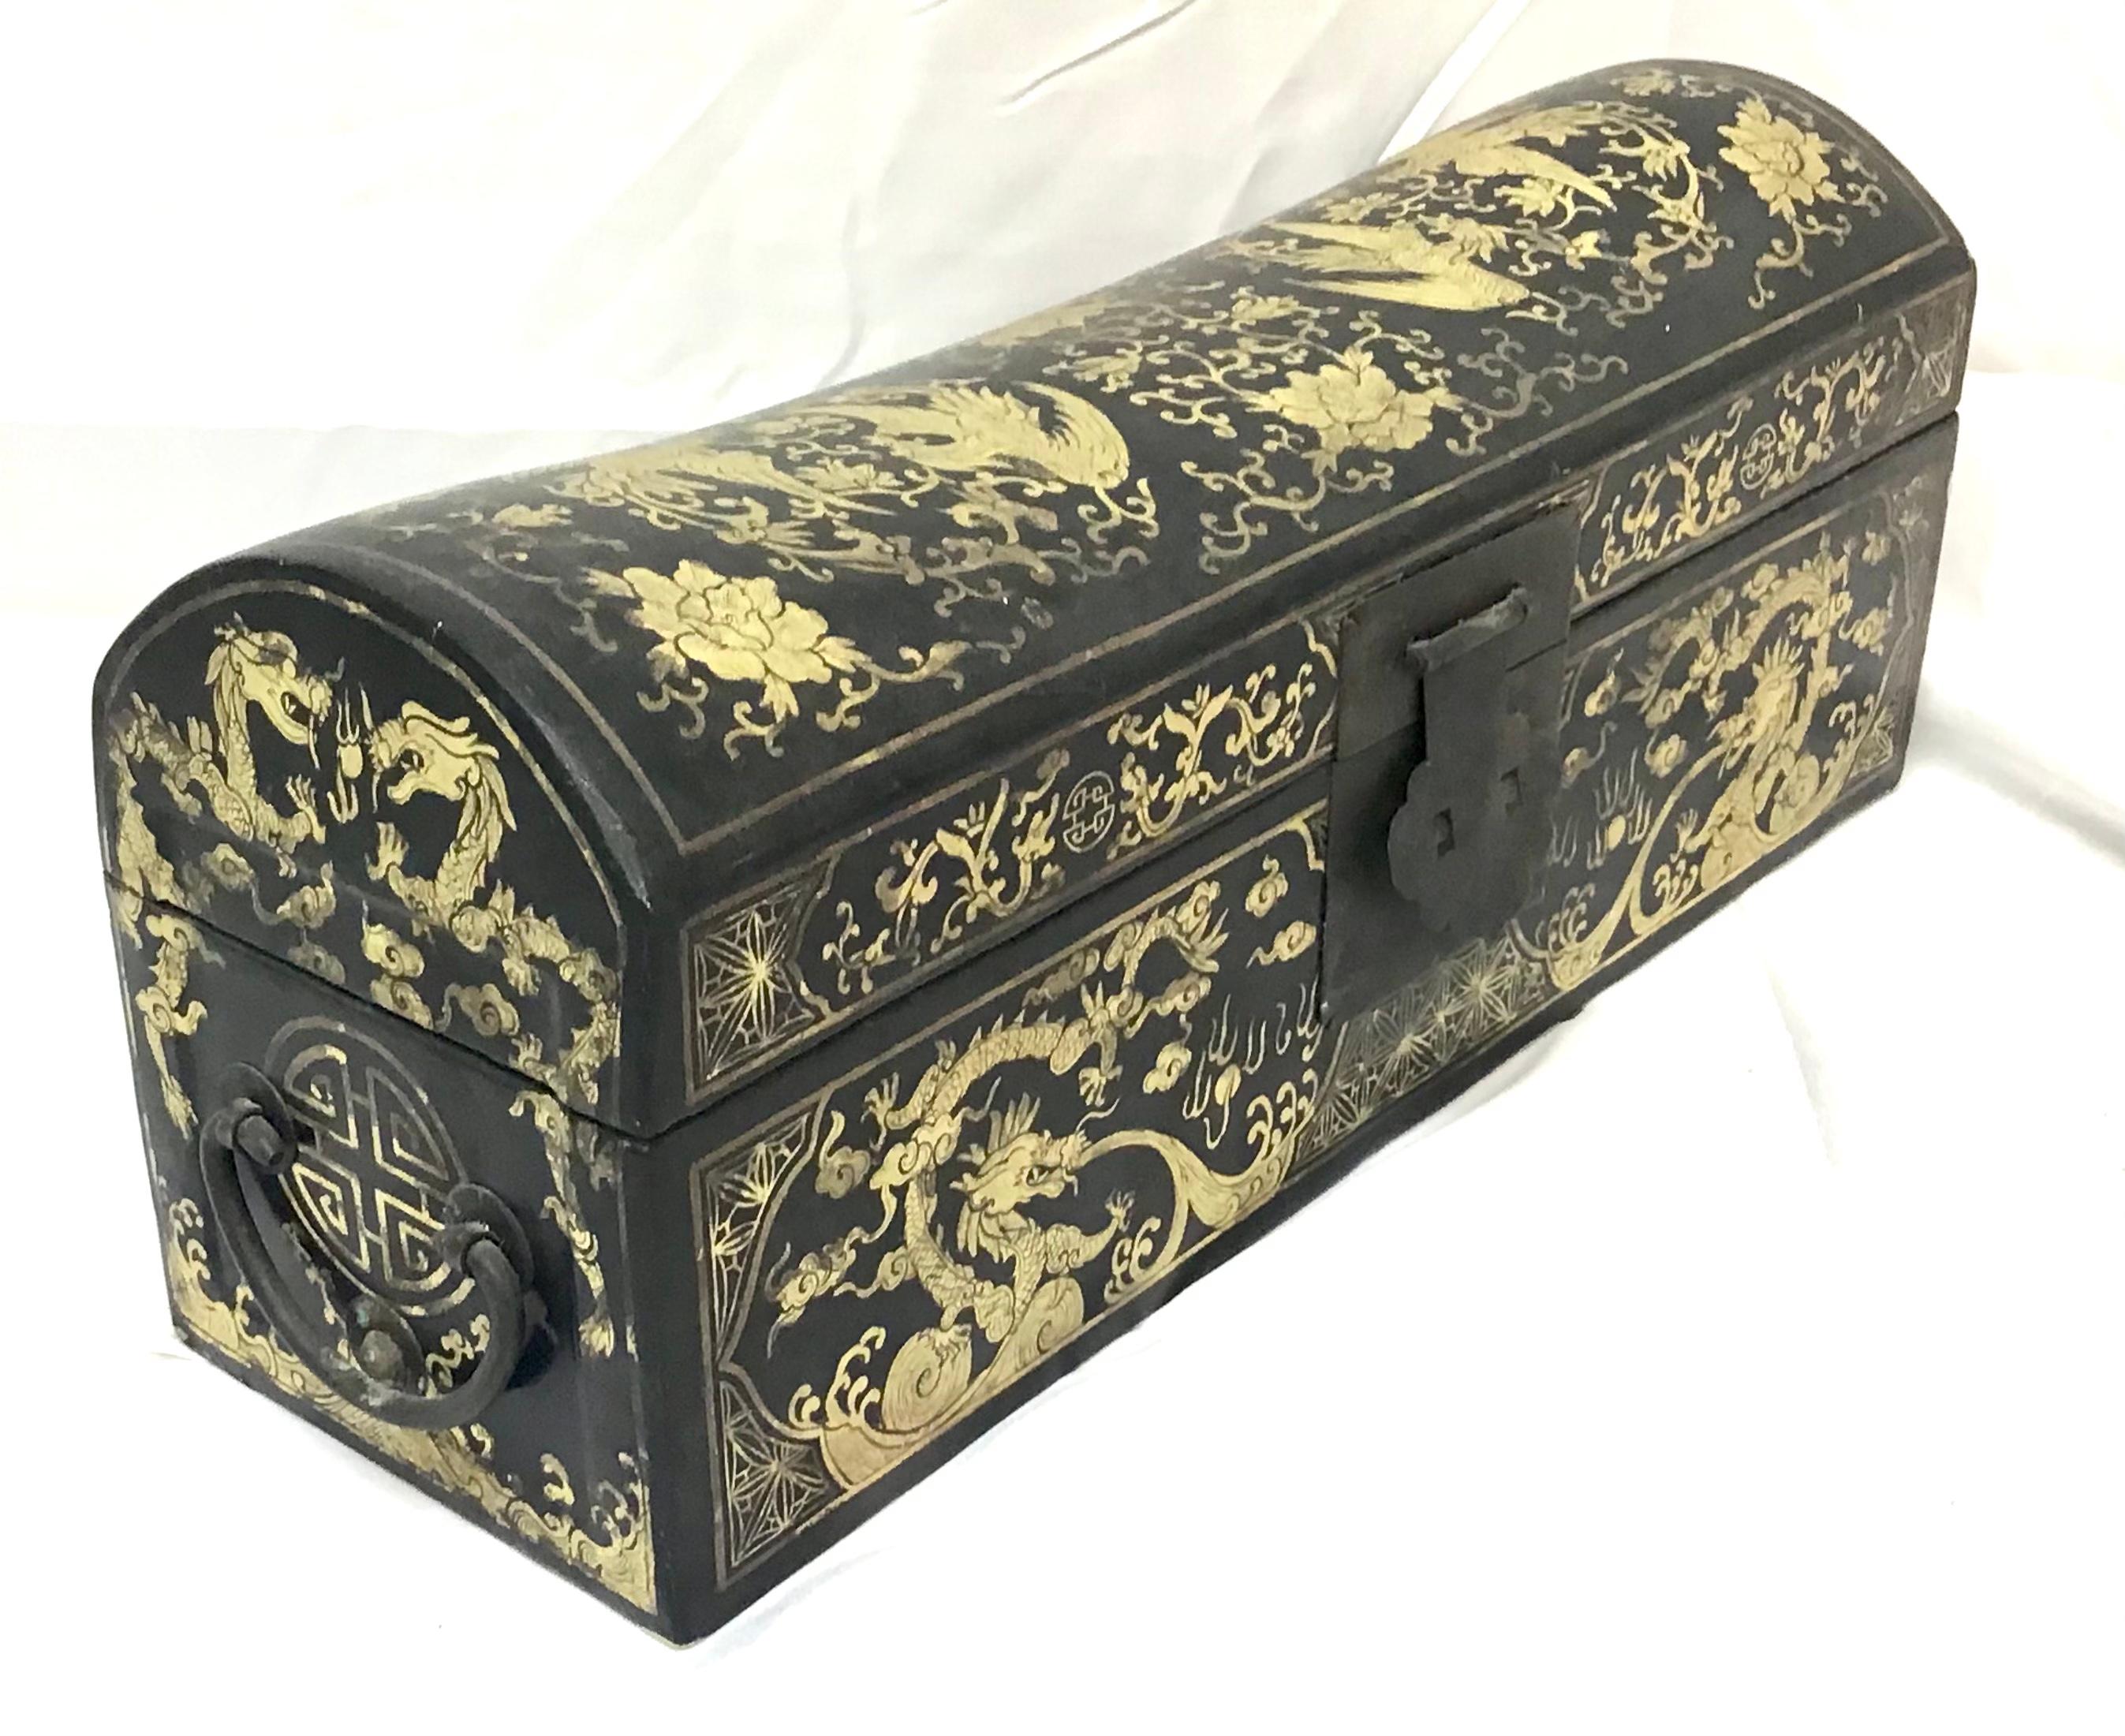 Antique Chinese Hand-Painted Chinoiserie Pillow Box In Good Condition For Sale In Bradenton, FL